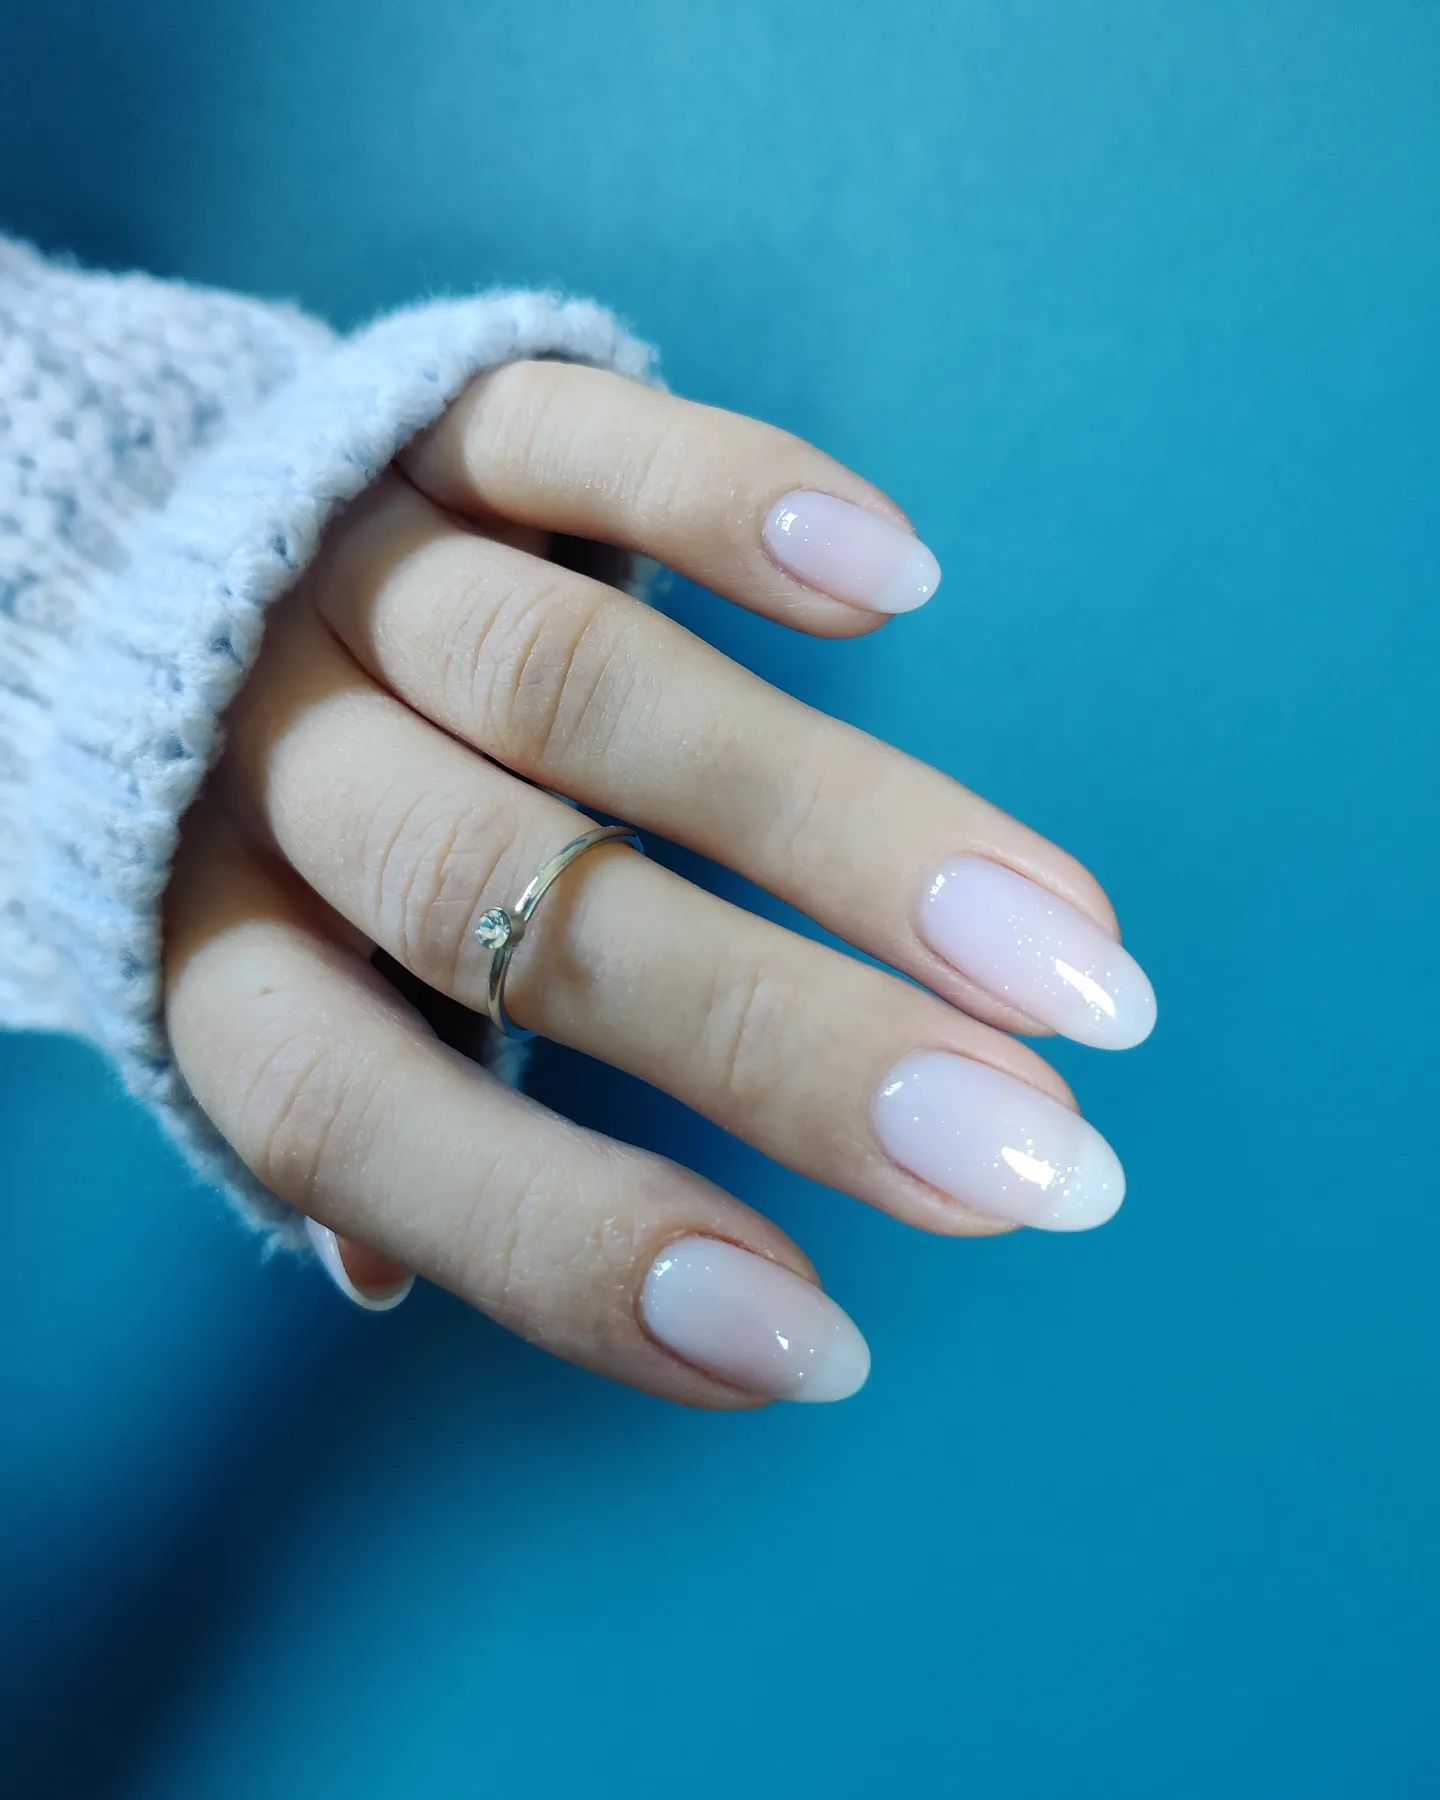 What Nail Colors are Best for Pale Skin Tones in Every Season? - Beauty Blog